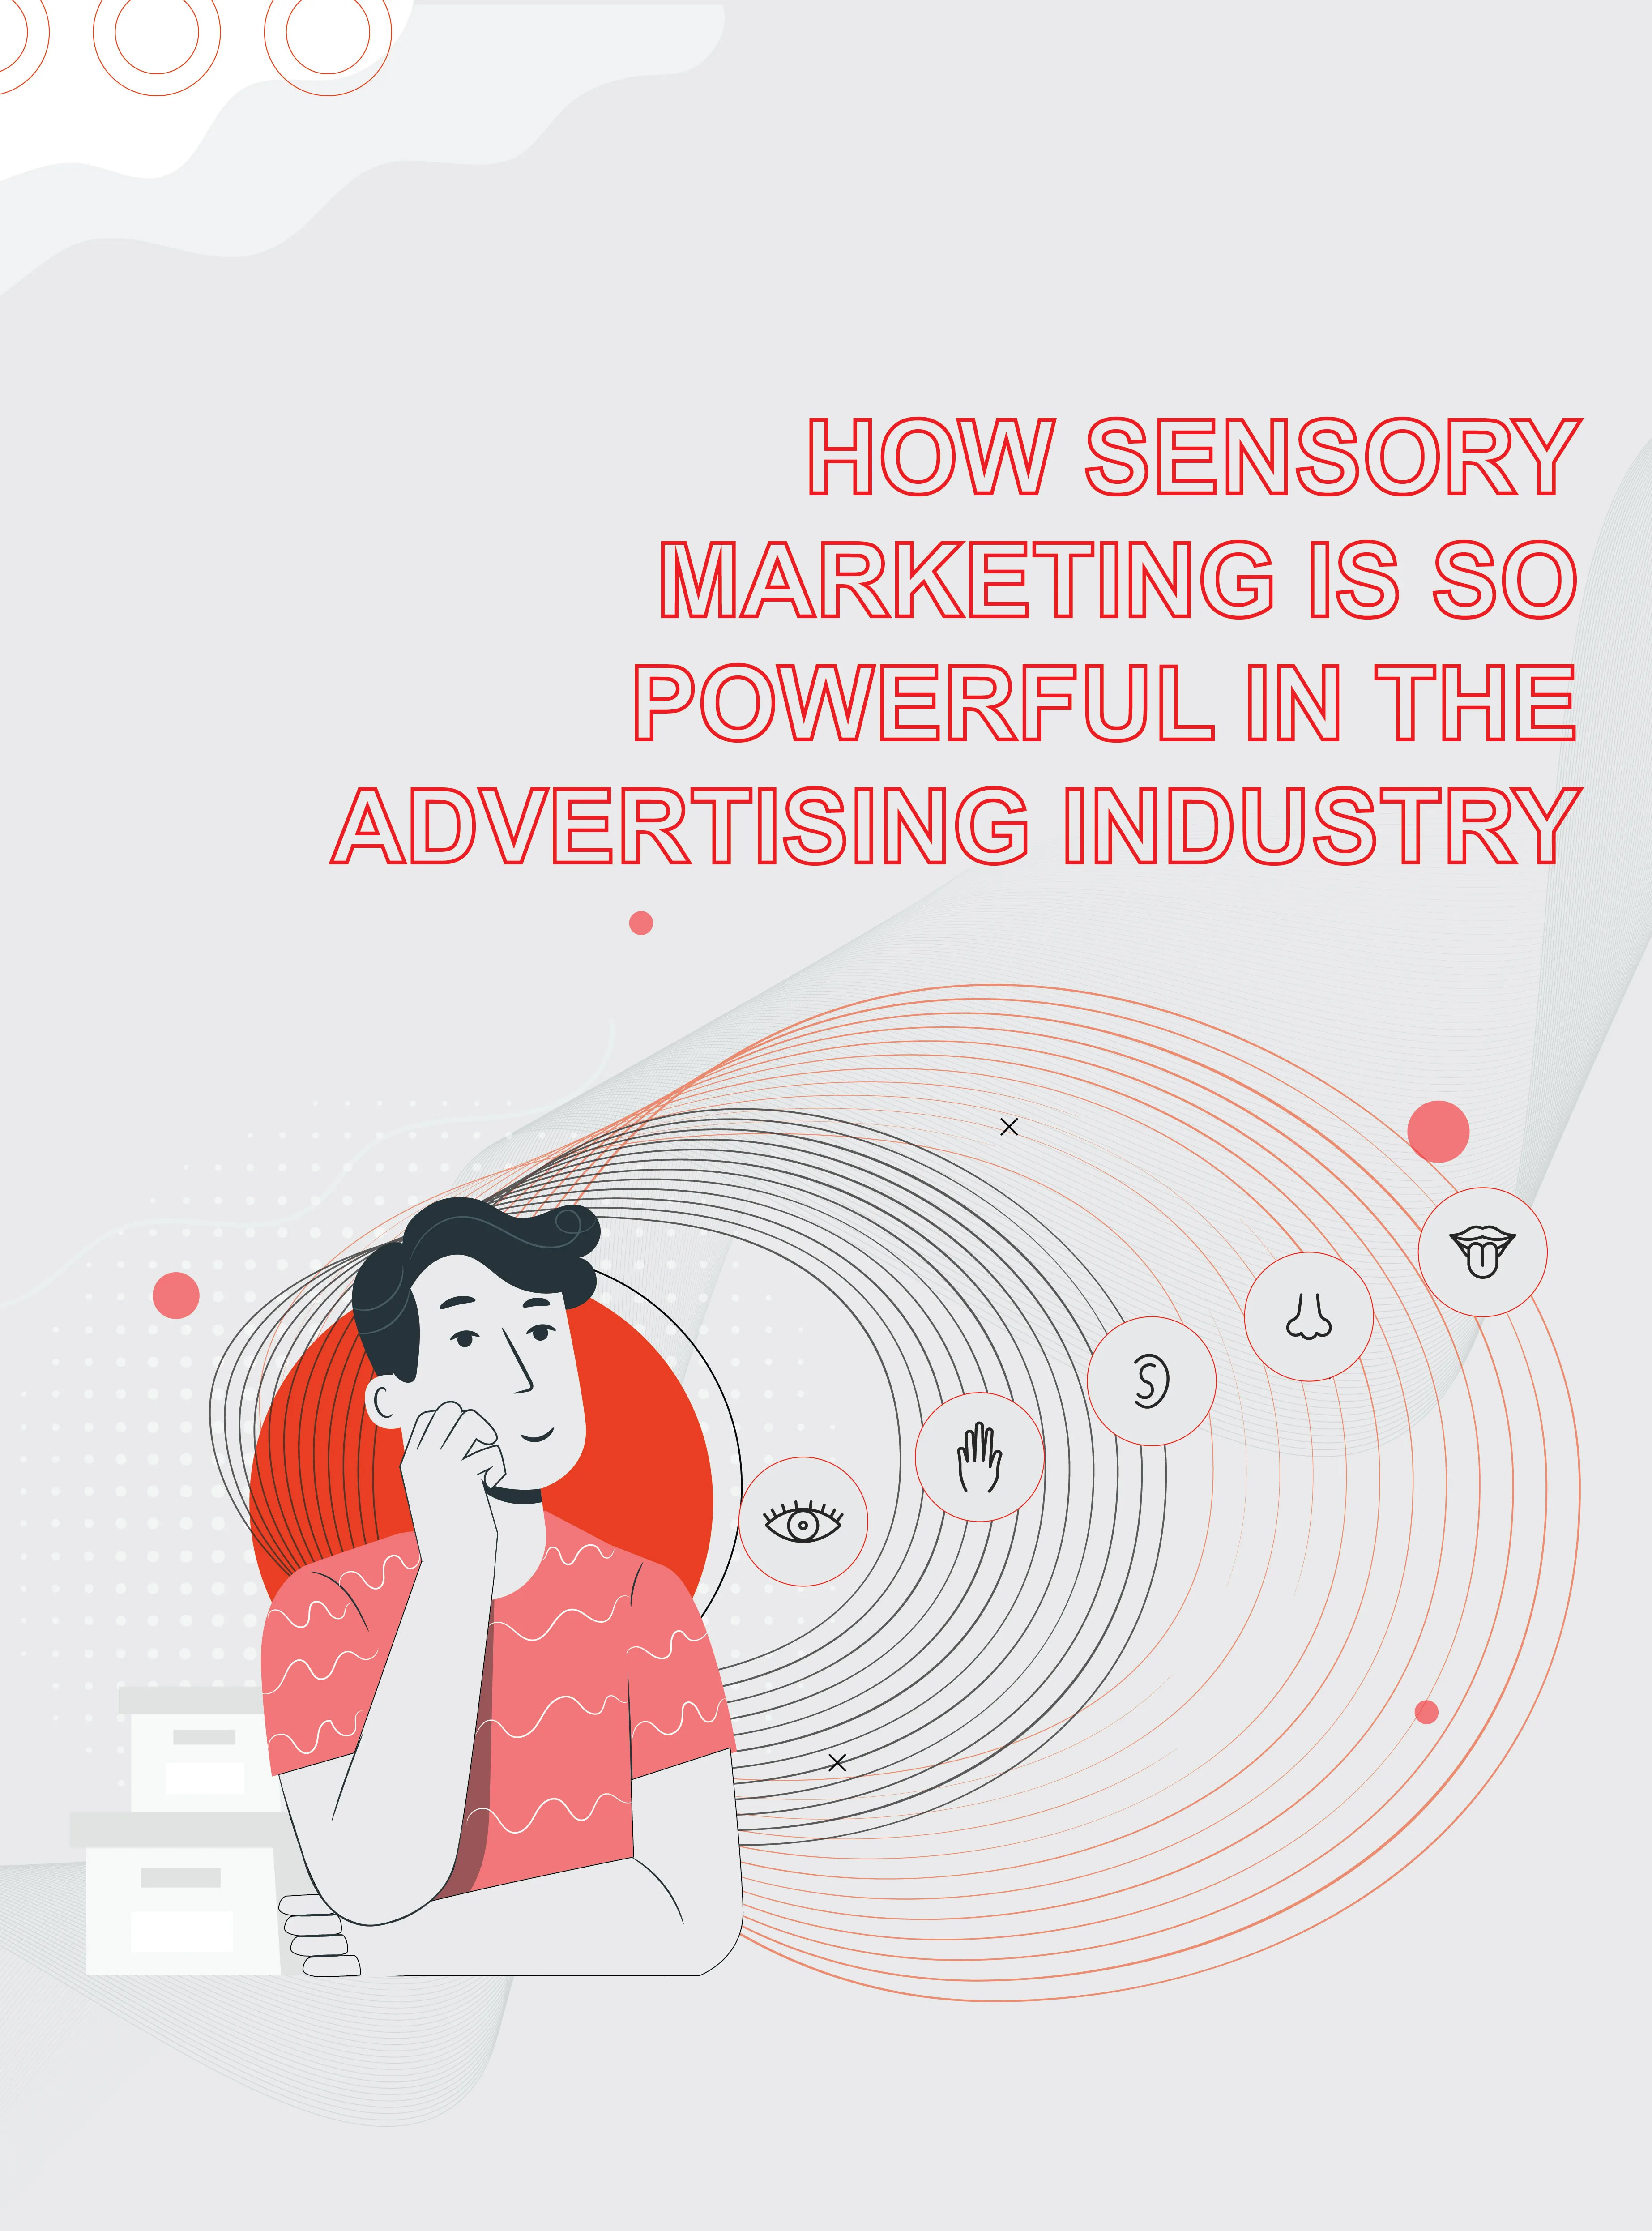 How sensory marketing is so powerful in the advertising industry